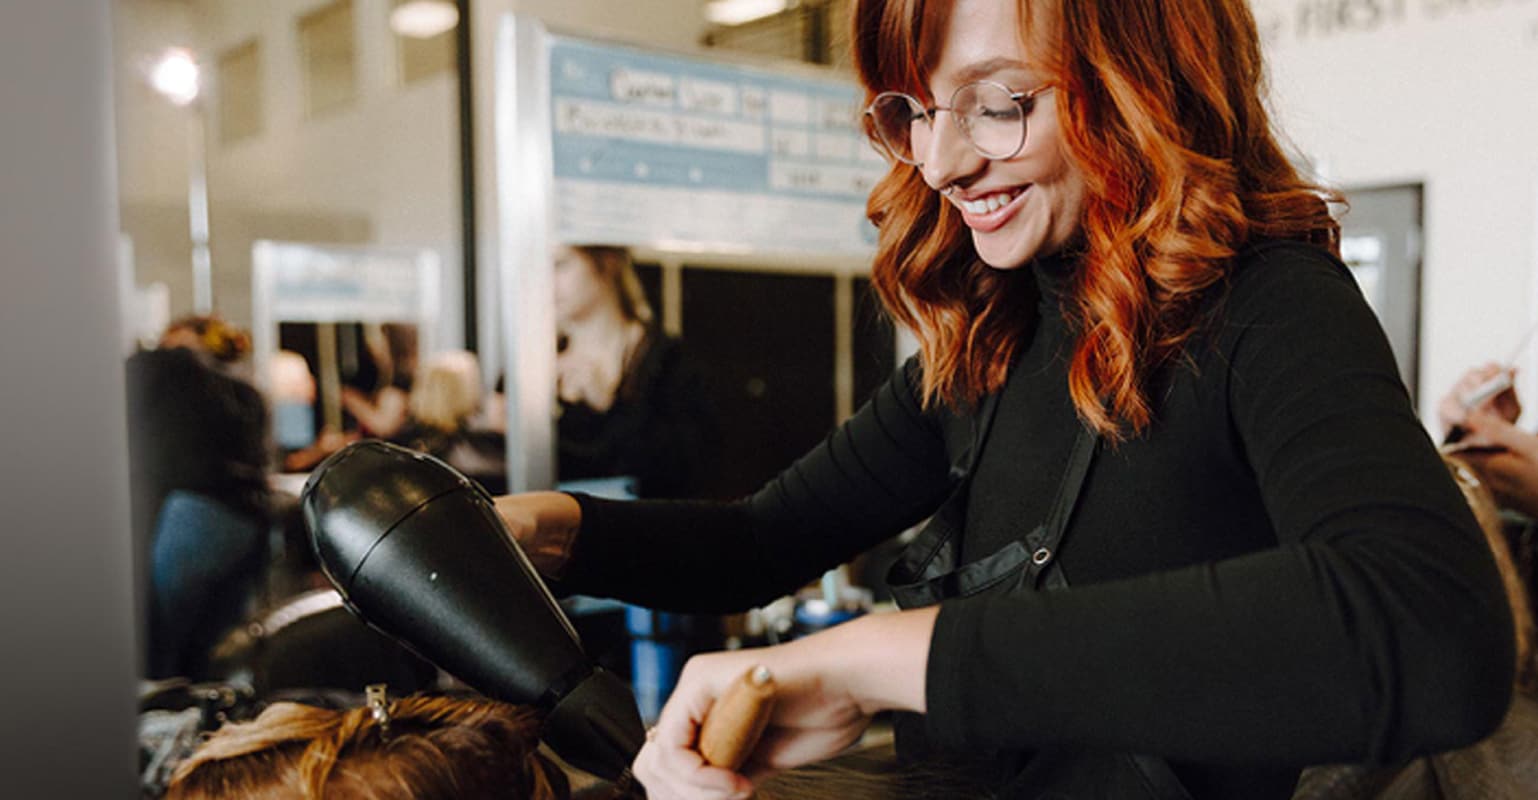 Learn the Aveda way and become an Aveda Artist